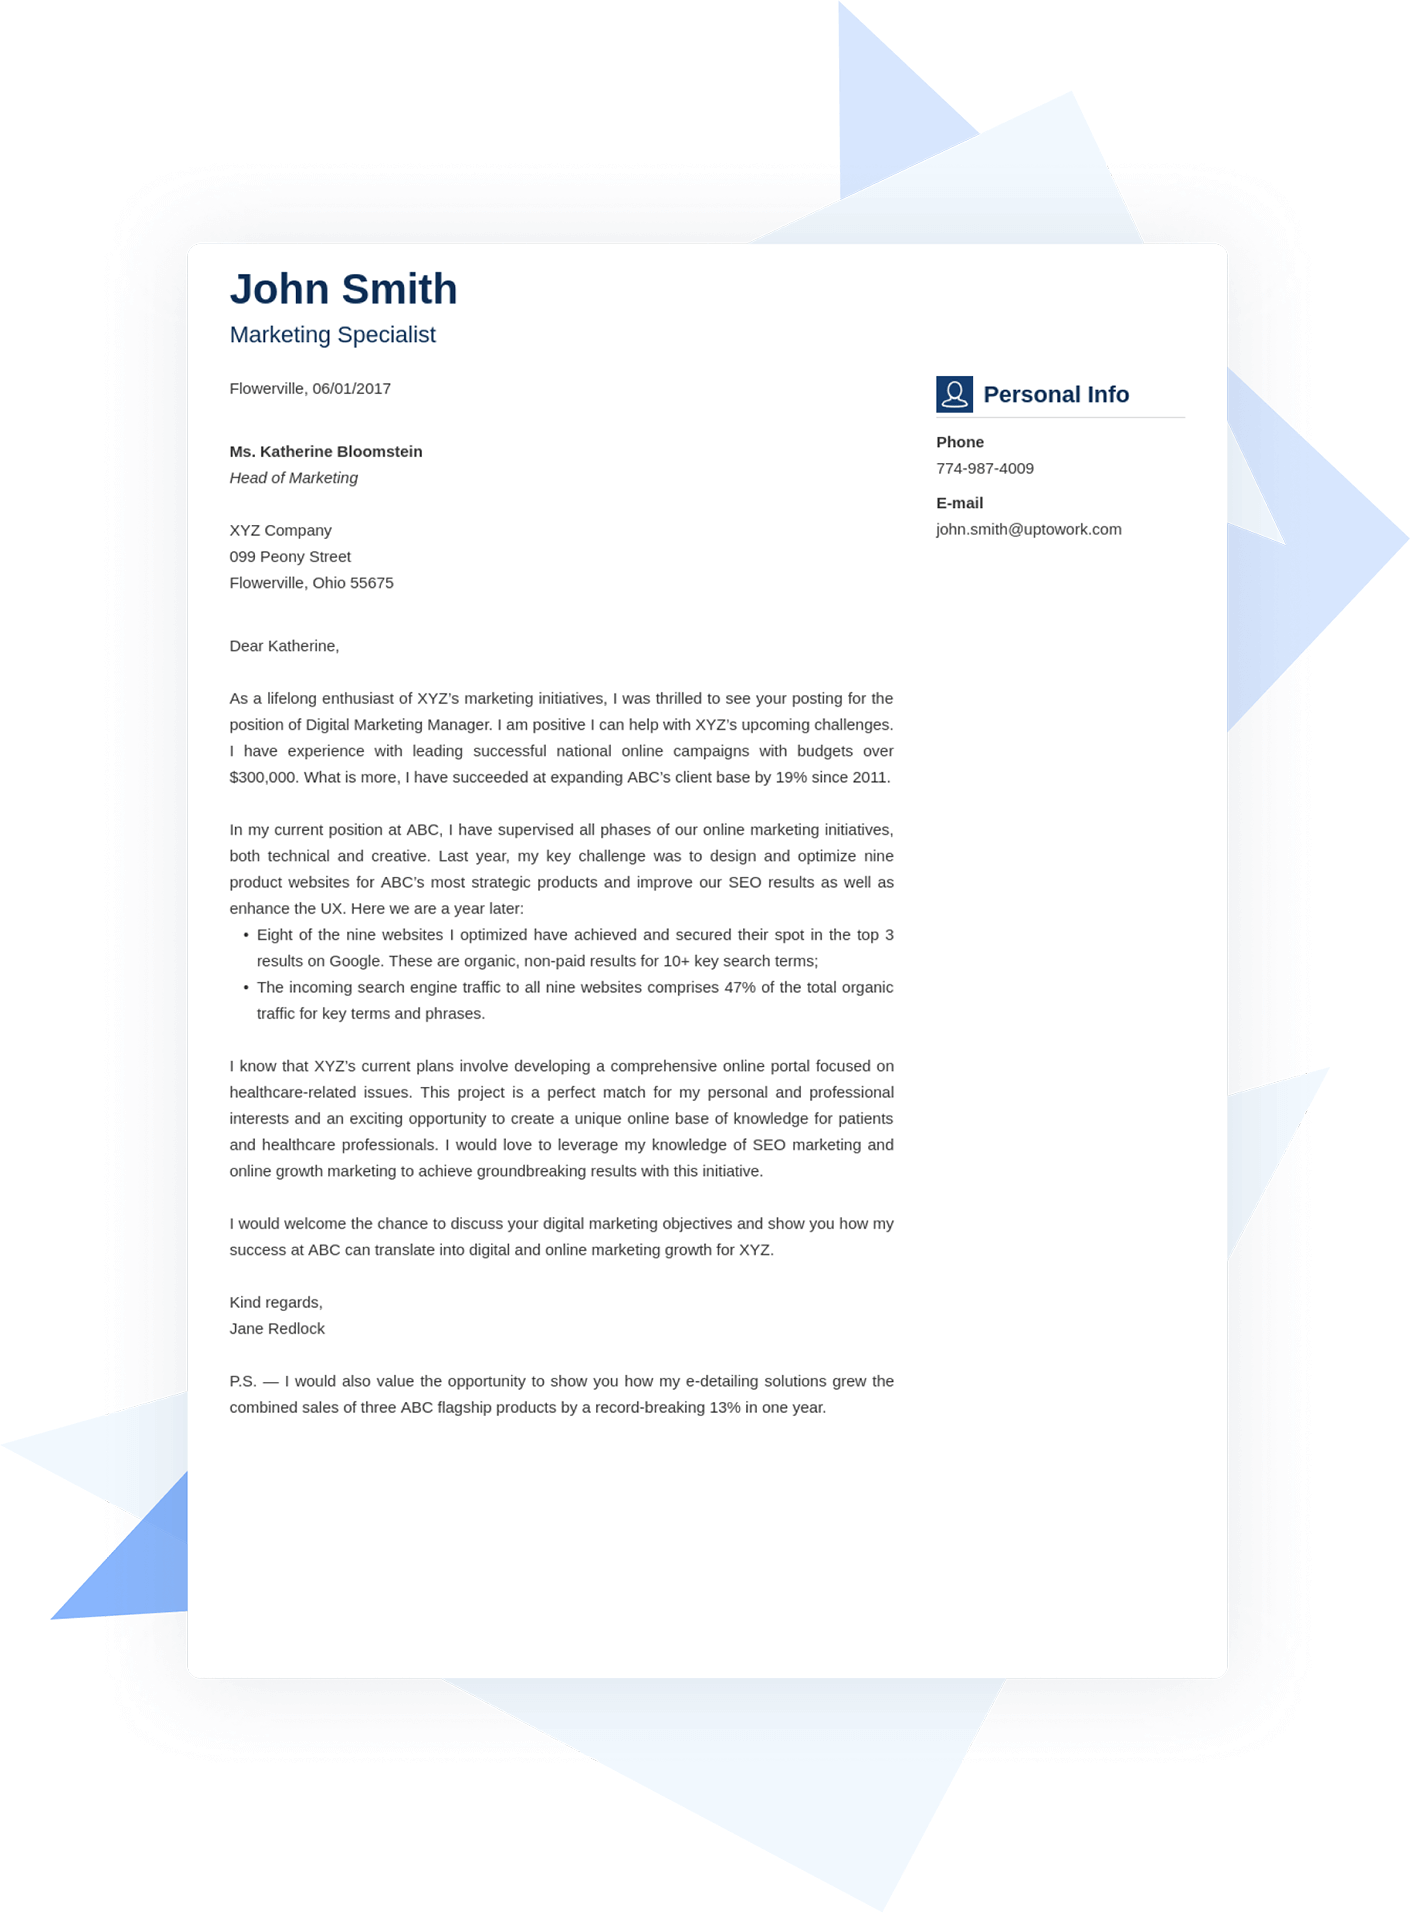 Sample Job Cover Letter Template from cdn-images.zety.com